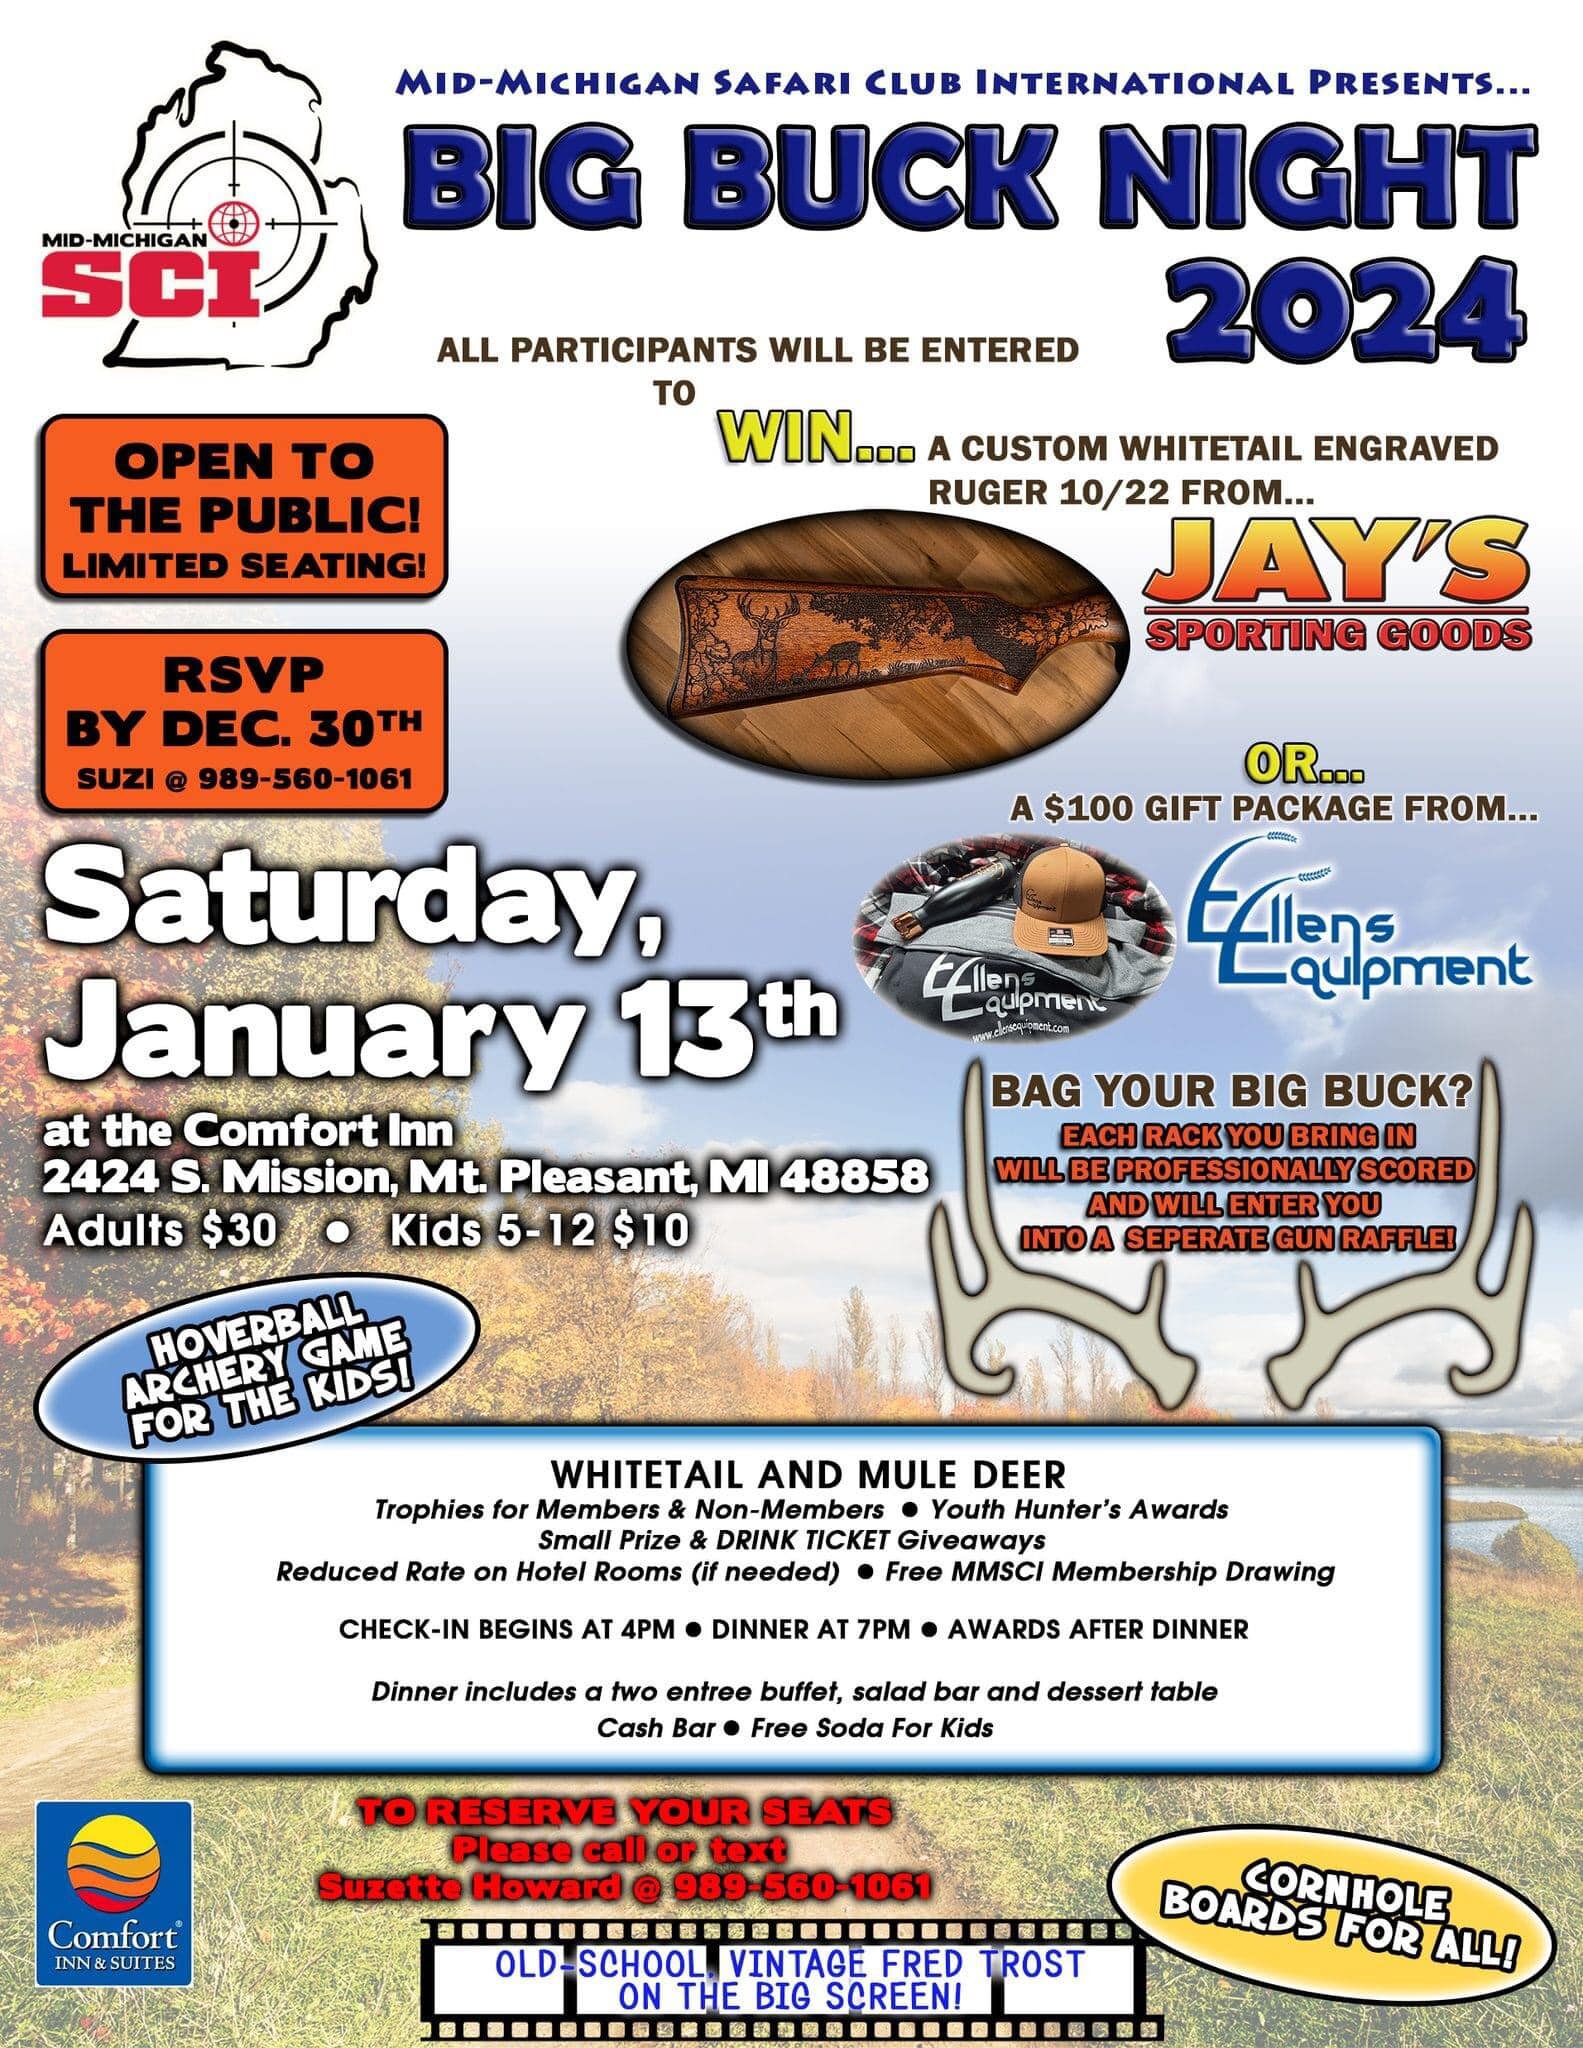 Last chance!!
If you are planning on attending or bringing your Big Buck to the Mid-Michigan Safari Club International Big Buck night don&rsquo;t wait to get your tickets. Sales stop at 9:00am tomorrow (January 9, 2024)